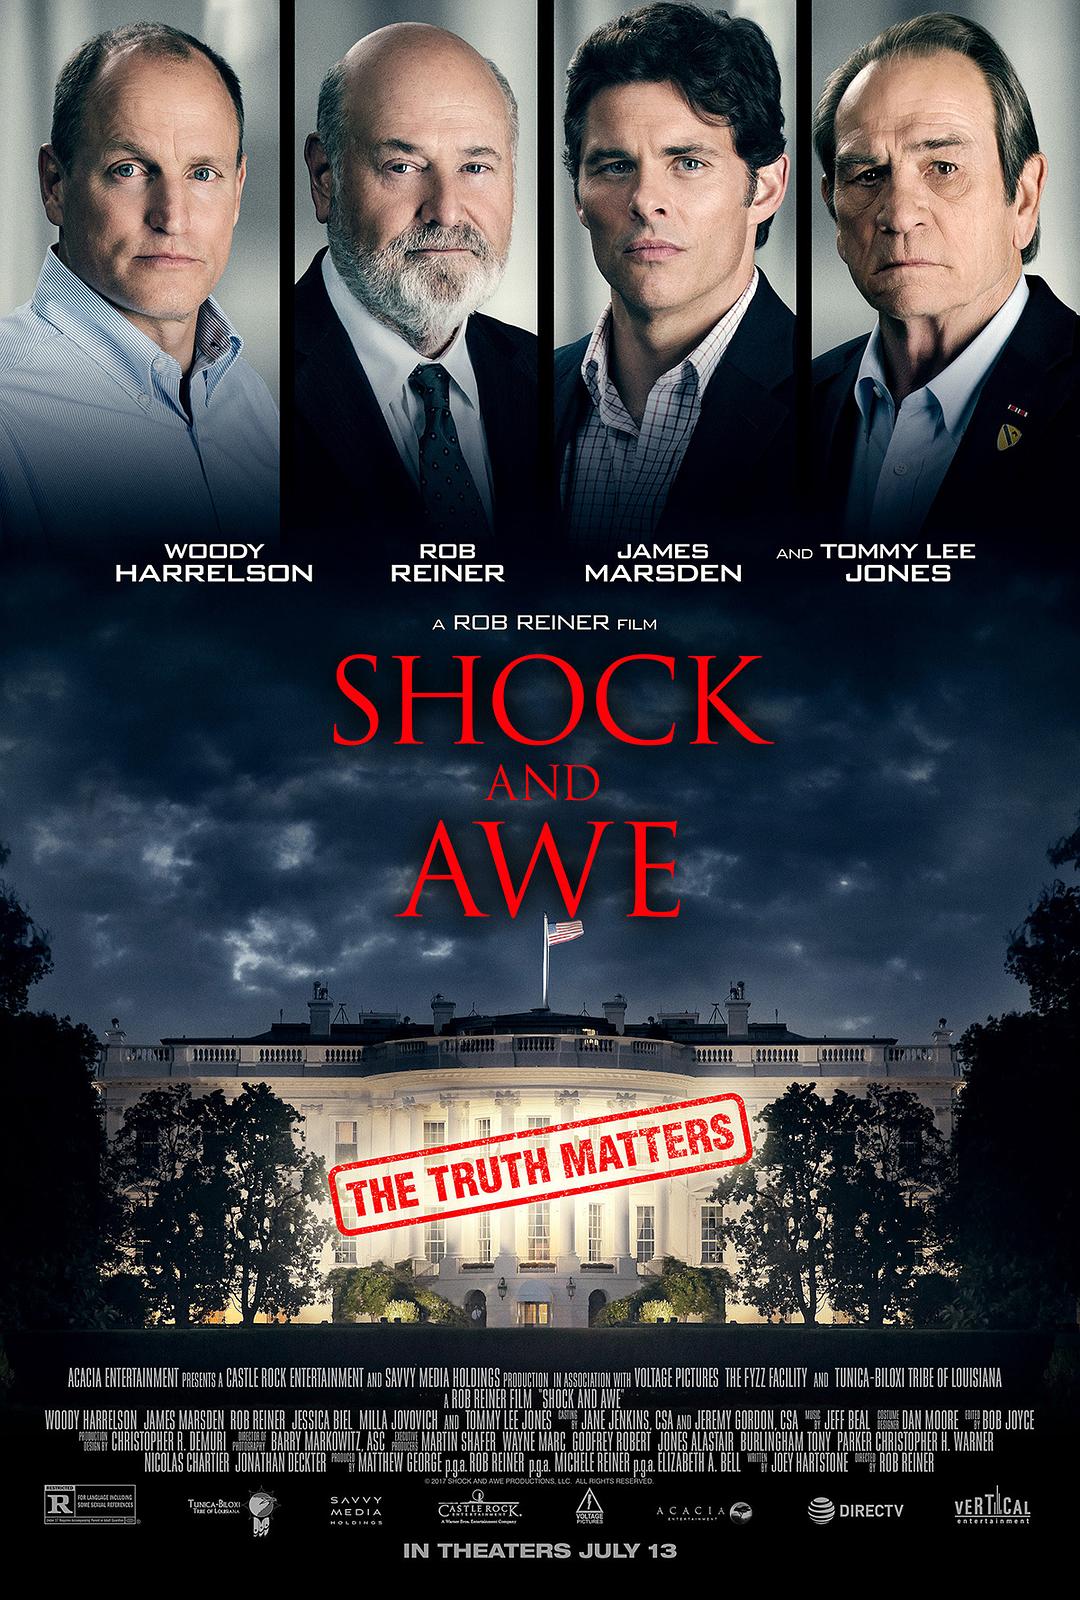 / Shock.and.Awe.2017.1080p.BluRay.X264-AMIABLE 6.57GB-1.png